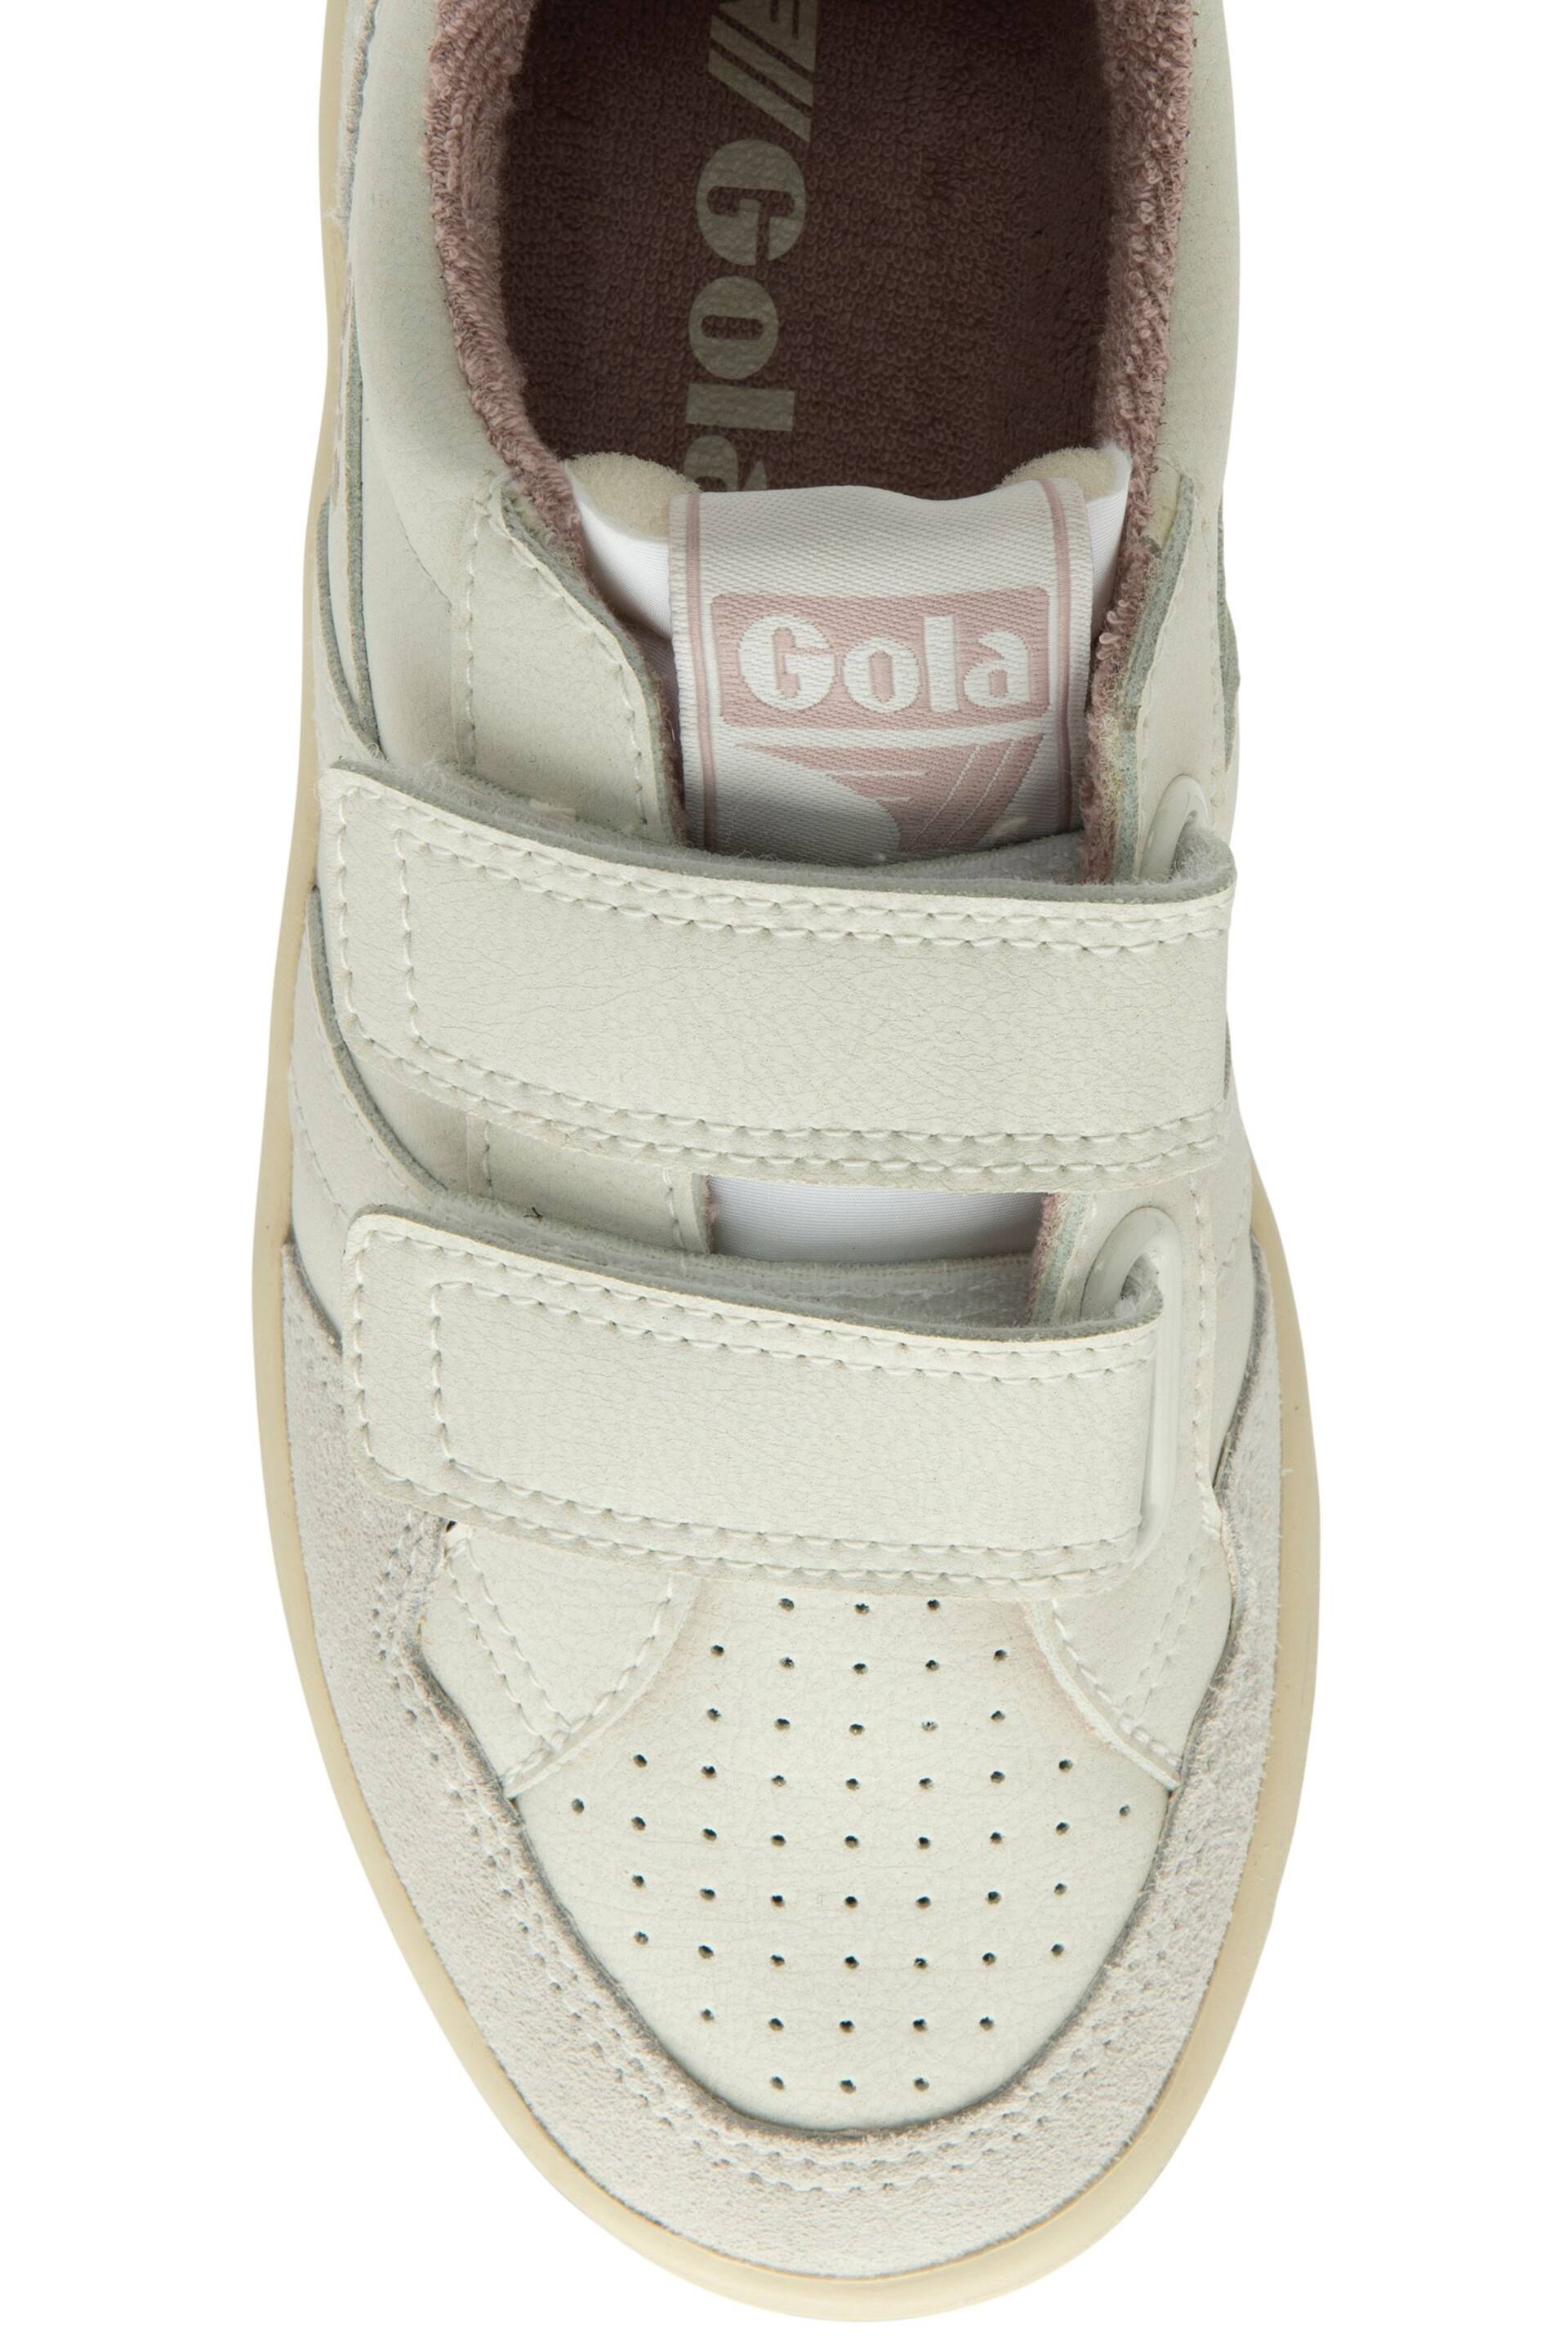 Gola Off White/Peony Kids Eagle Strap Trainers - Image 4 of 4